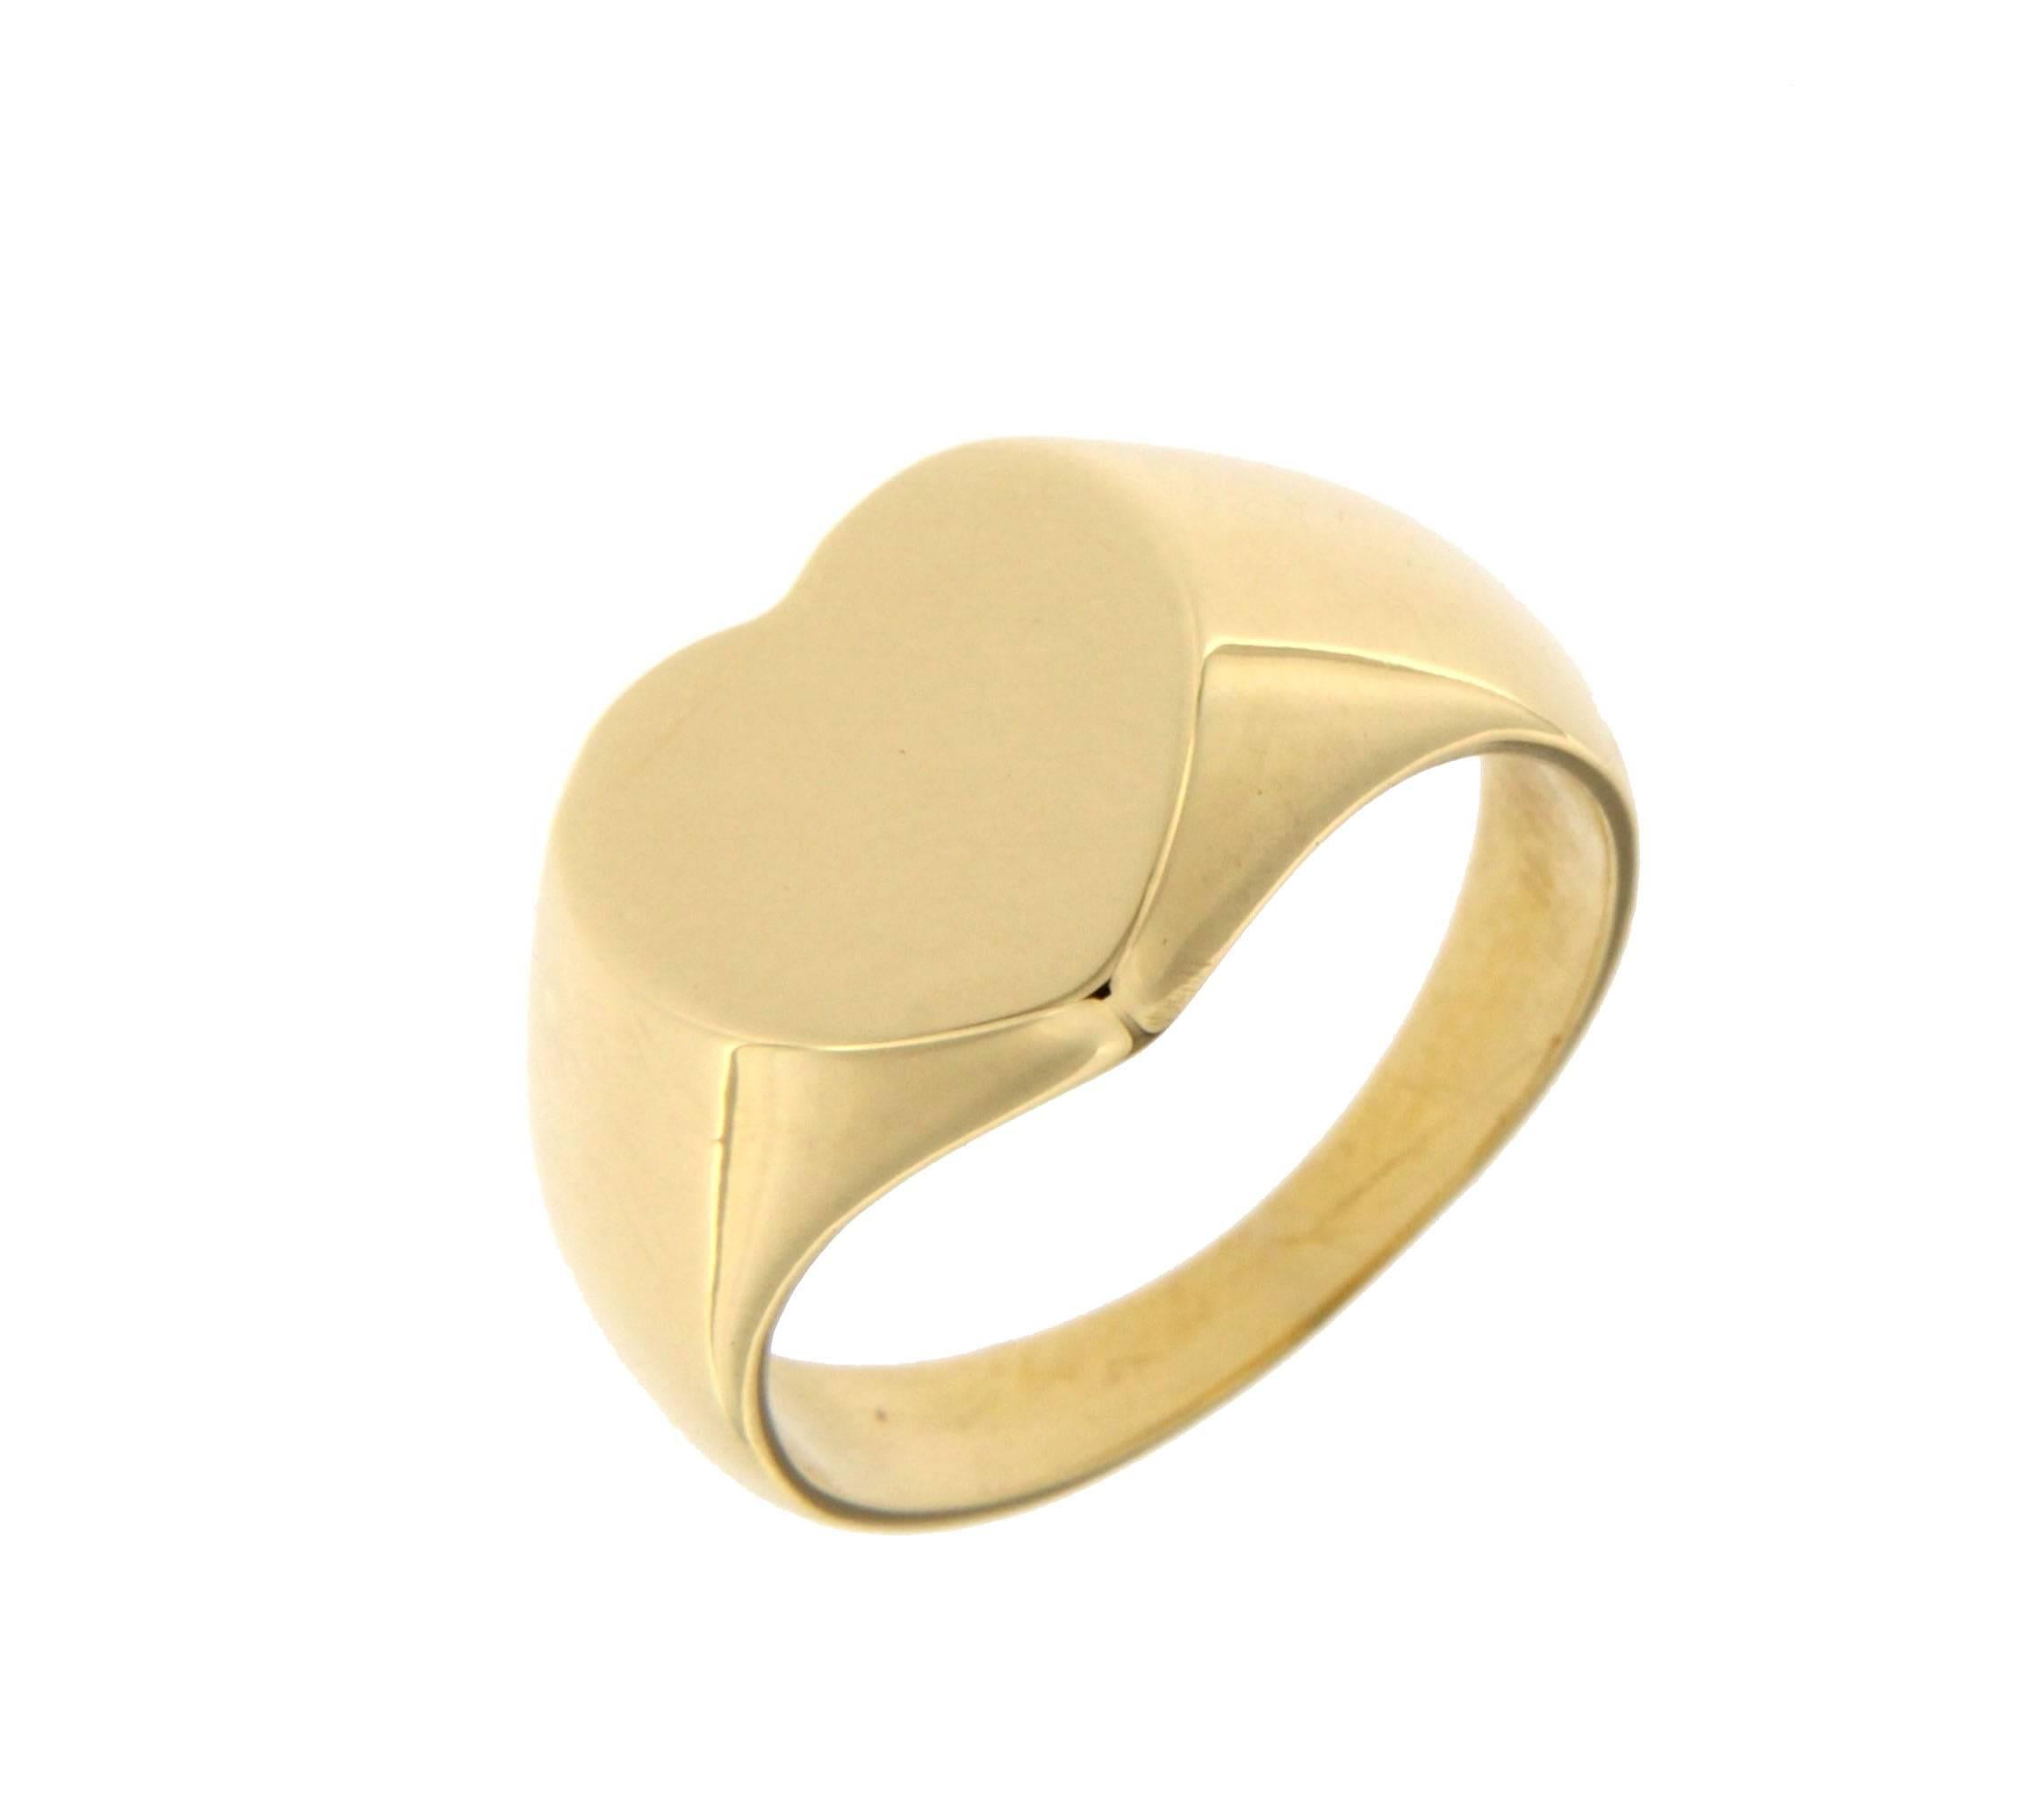 Jona design collection, 18 karat yellow gold heart shaped signet ring, fit to be worn on pinkie finger.
Size US 3, can be sized to any specification. All Jona jewelry is new and has never been previously owned or worn. Each item will arrive at your